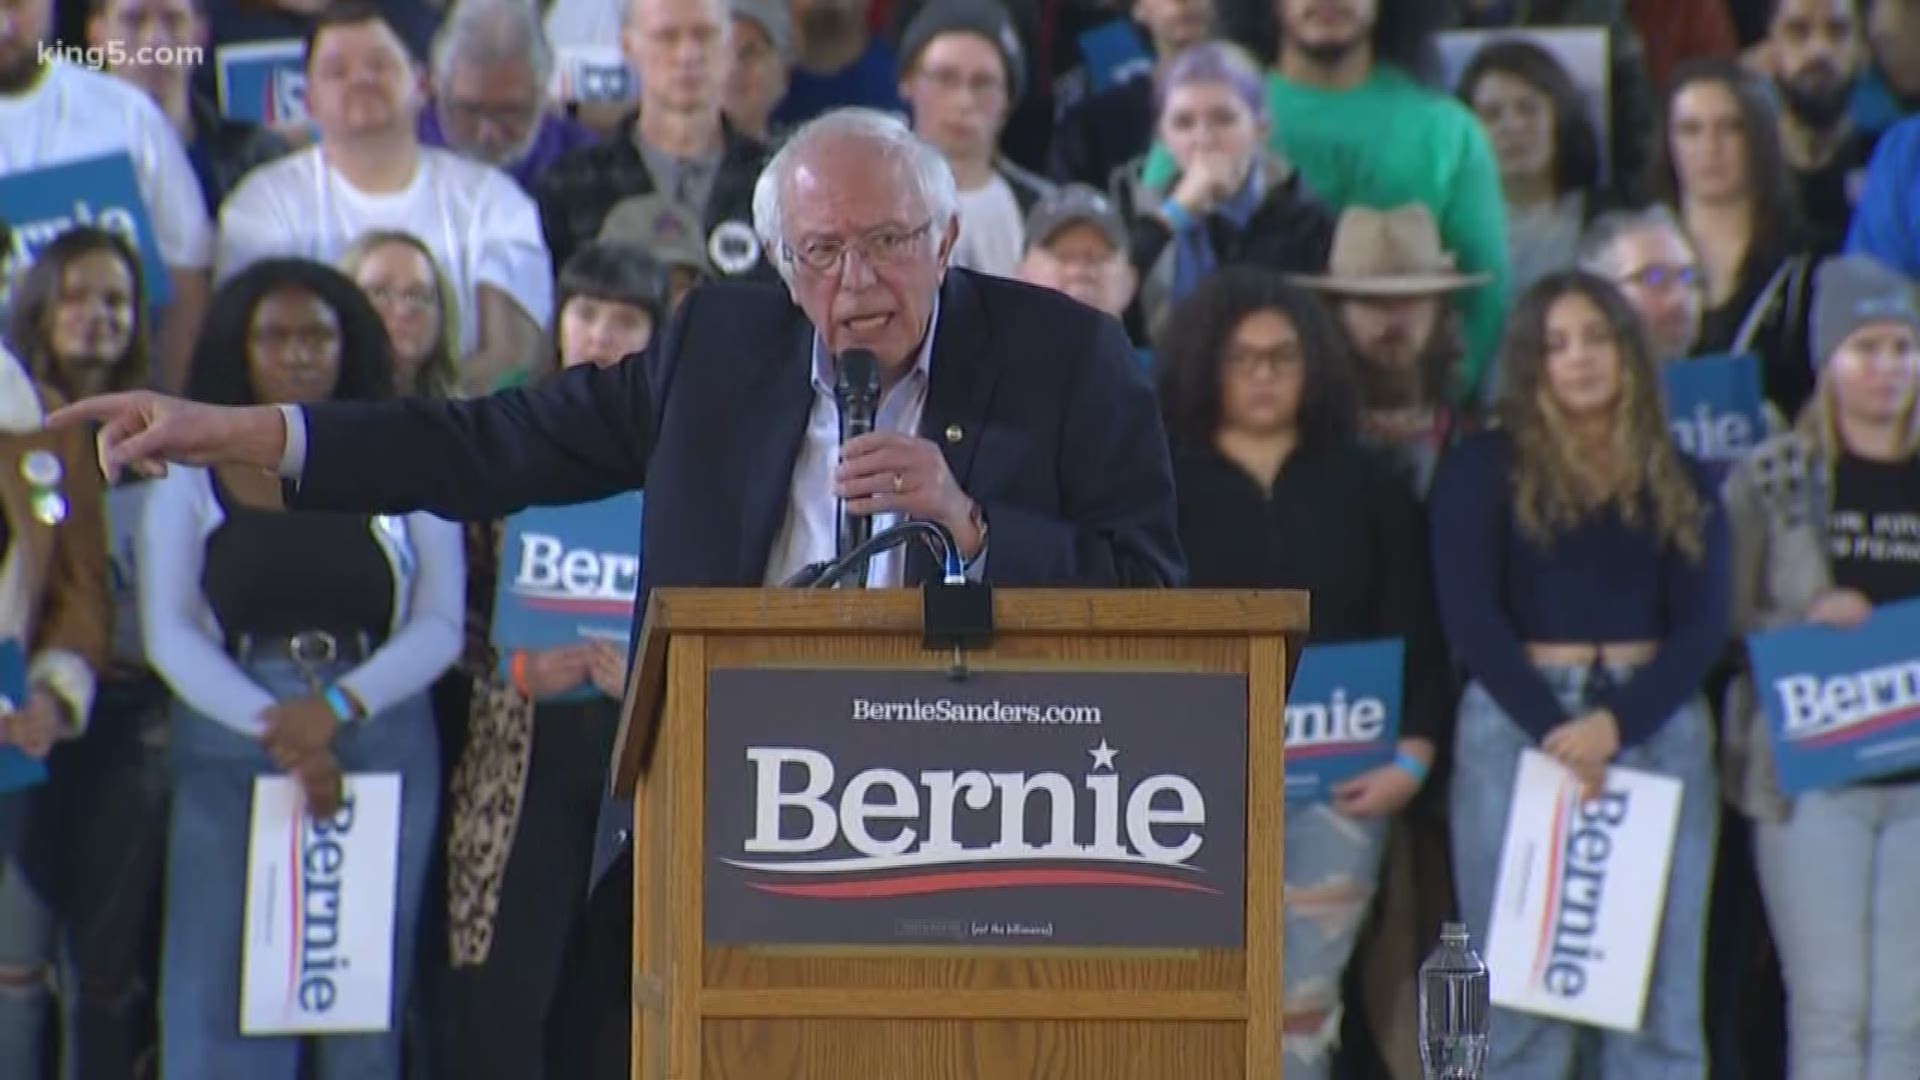 Presidential candidate Bernie Sanders held a rally for supporters in Tacoma on Monday night. KING 5's Chris Daniels and Vanessa Misciagna were there.